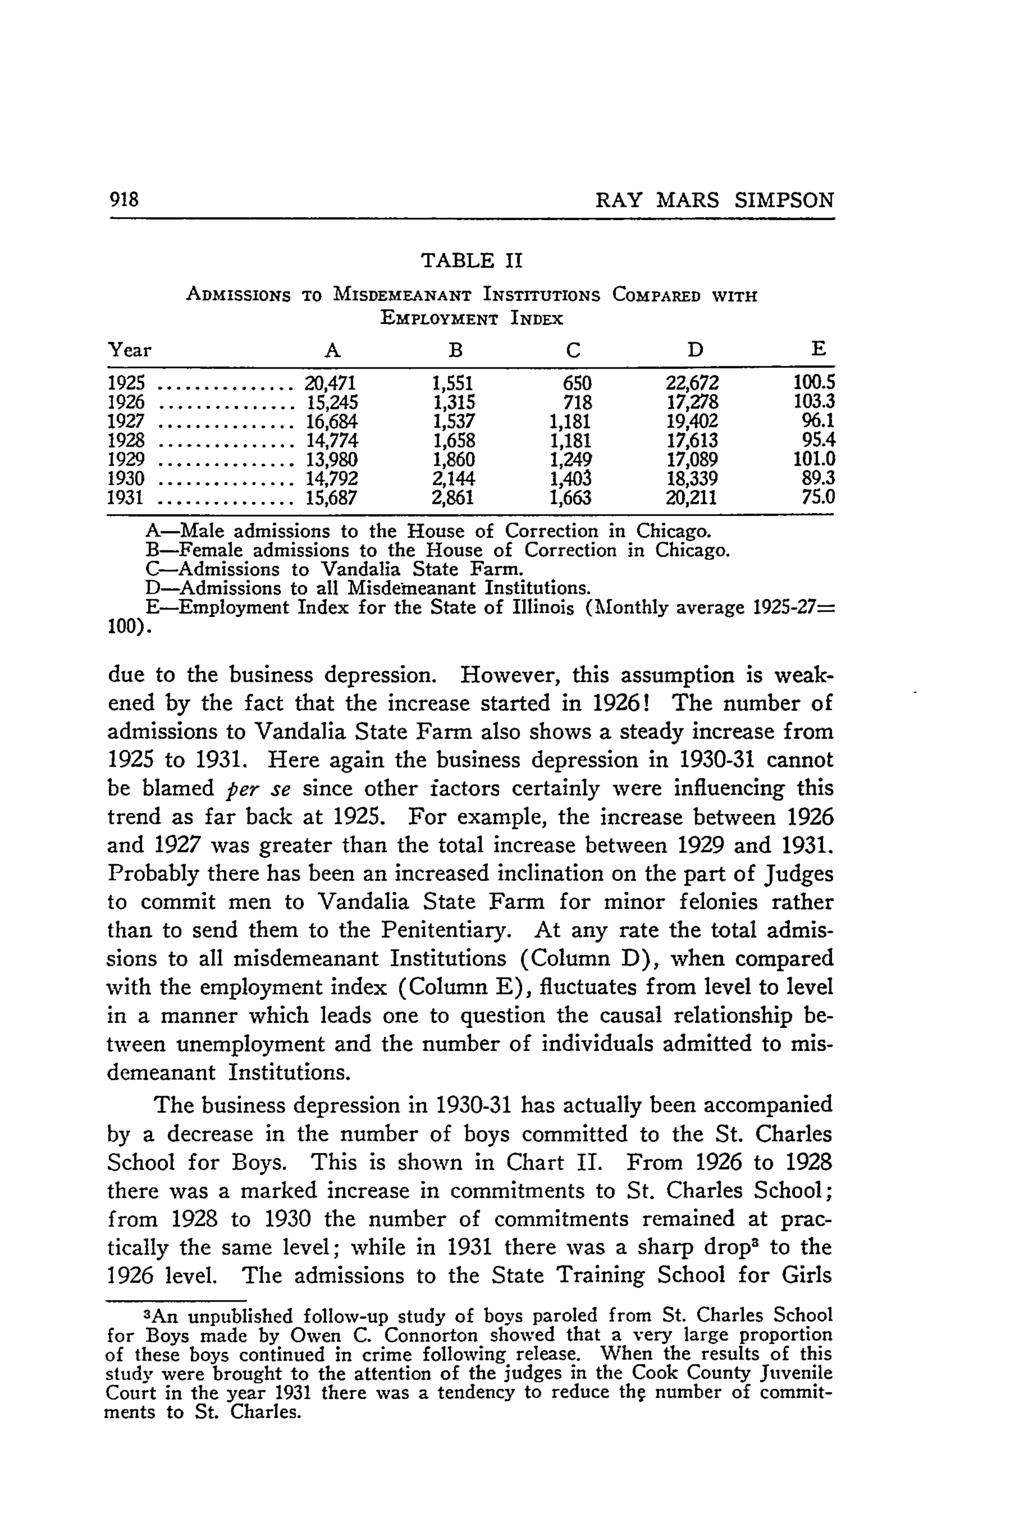 918 RAY MARS SIMPSON TABLE II ADMISSIONS TO MISDEMEANANT INSTITUTIONS COMPARED WITH EMPLOYMENT INDEX Year A B C D E 1925... 20,471 1,551 650 22,672 100.5 1926... 15,245 1,315 718 17,278 103.3 1927.